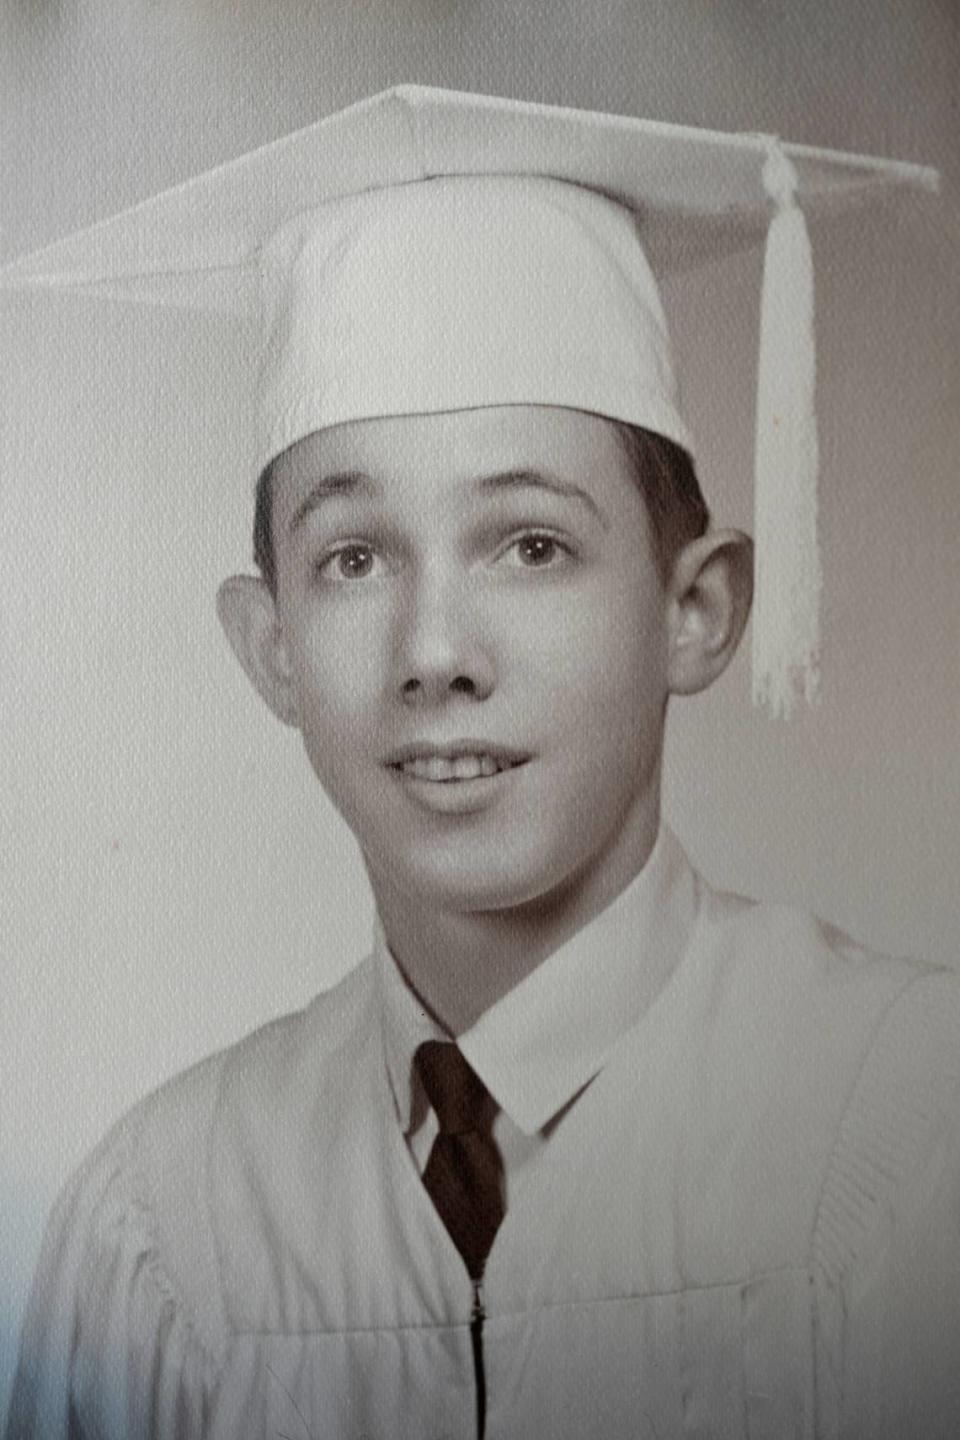 Warren Barrett in his 1967 graduation photo from Coral Park Senior High School, a few years before struggles with mental illness derailed his life.